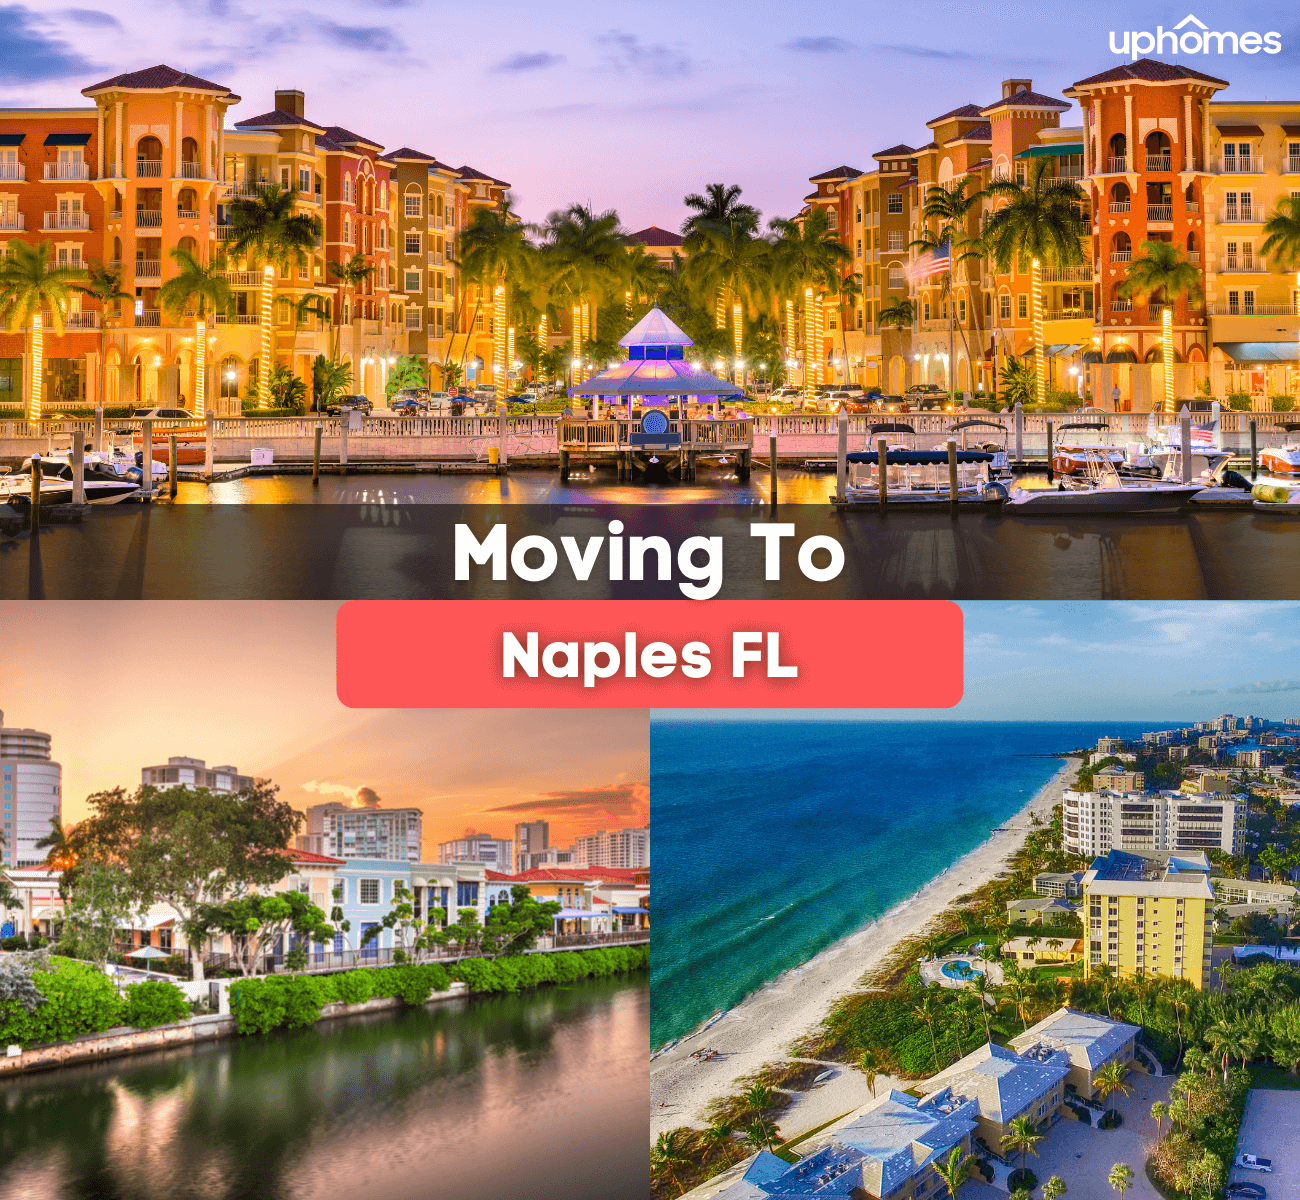 Moving to Naples, FL - What is it like living in Naples Florida?